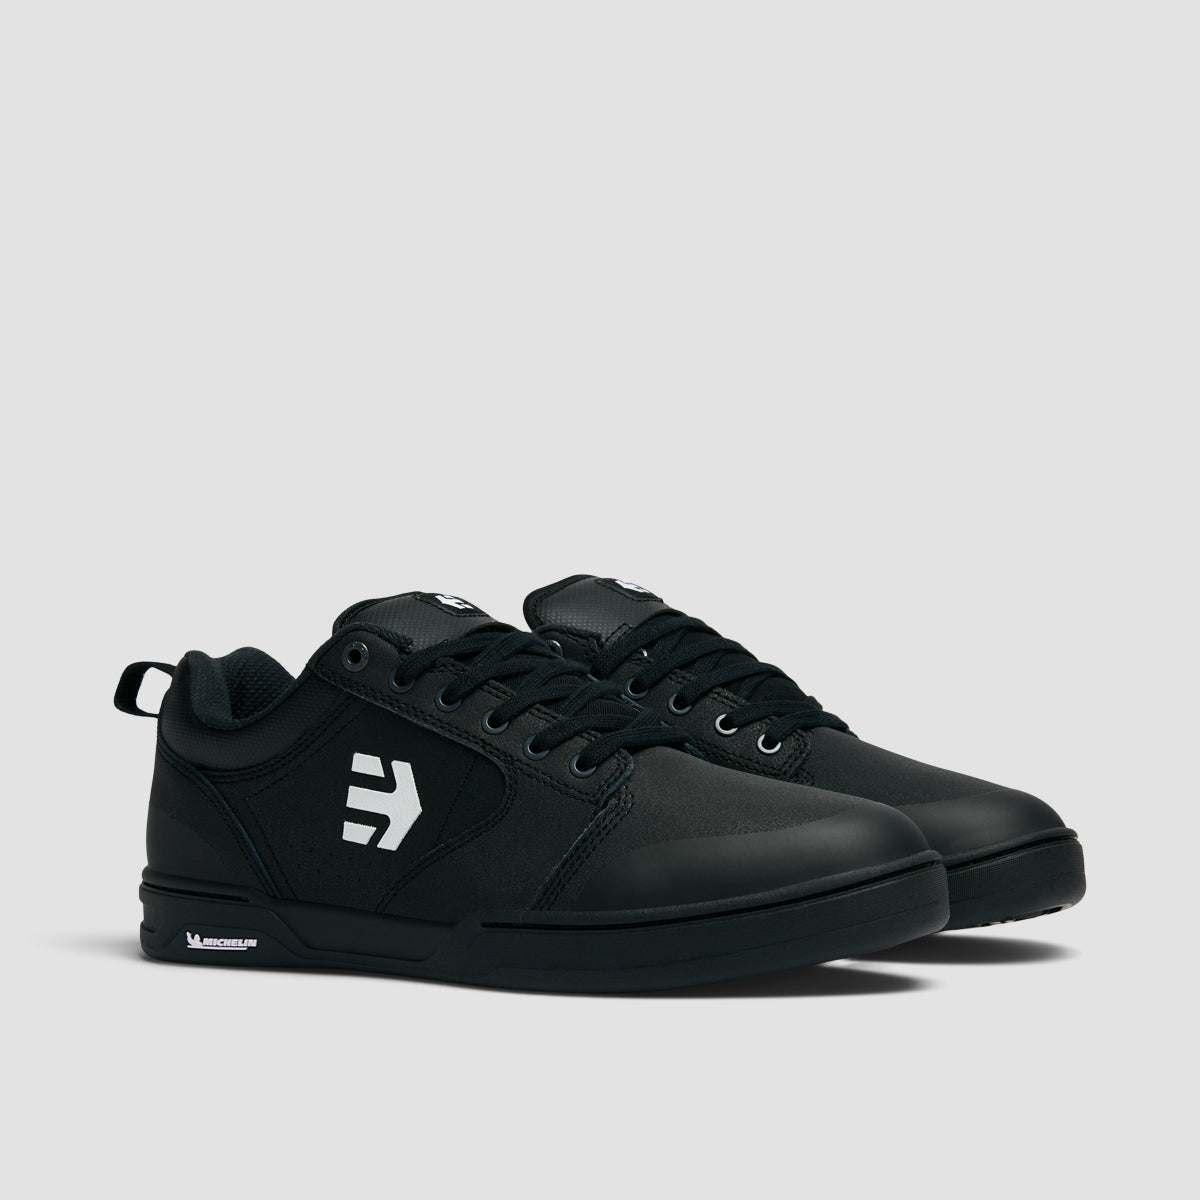 Etnies Camber Michelin Shoes - Black/White